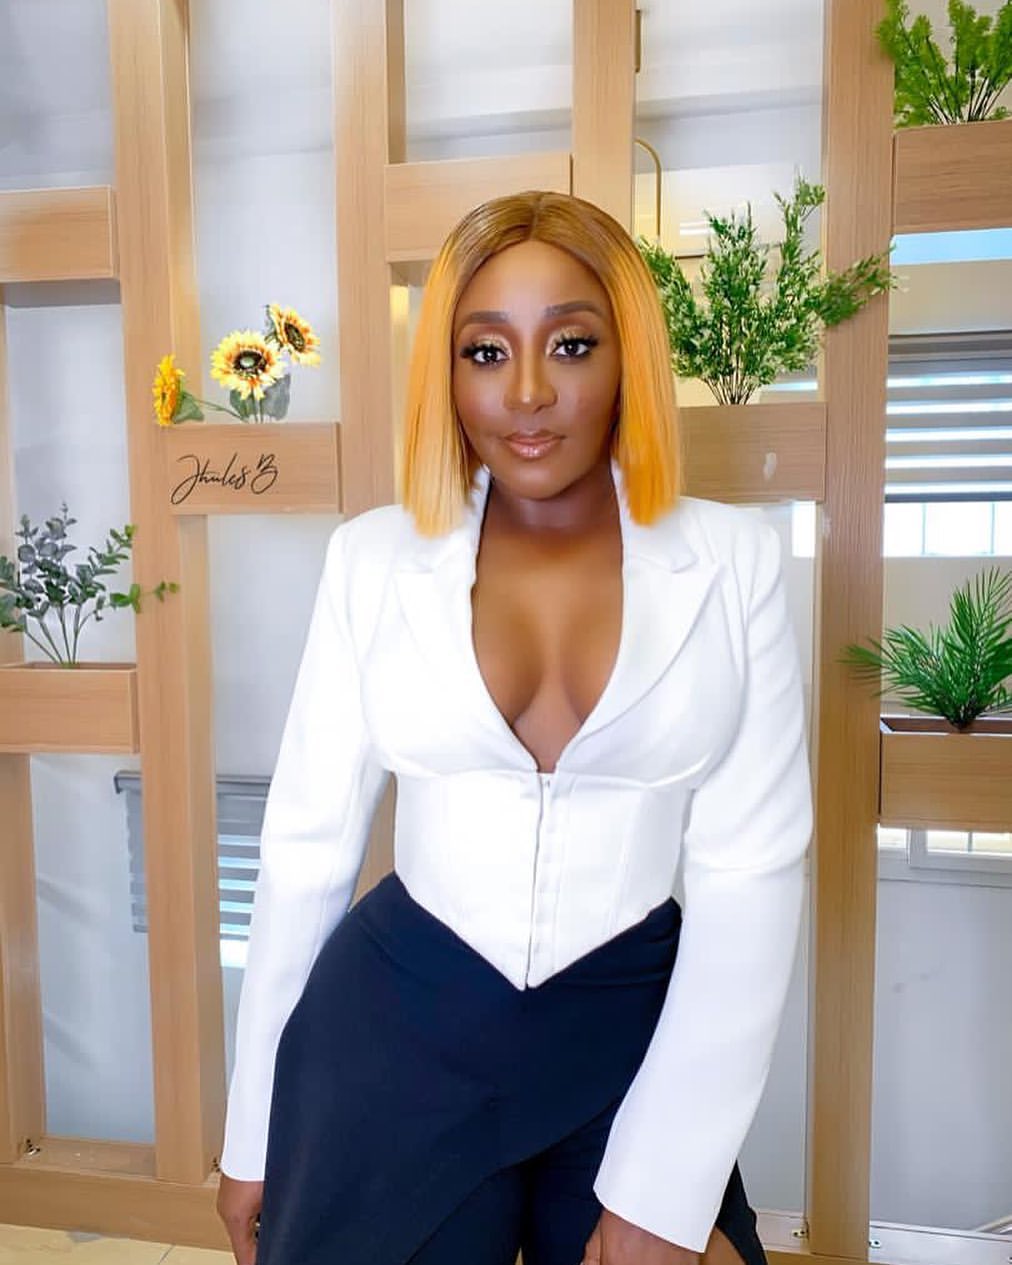 Ini Edo Shows Her Dance Moves, Asks Fans Not To Rate Her (Video) 12698239_iniedo16041696552432273820820765182260850256_jpegd98272f9e09ad82a31f263ff6865257d